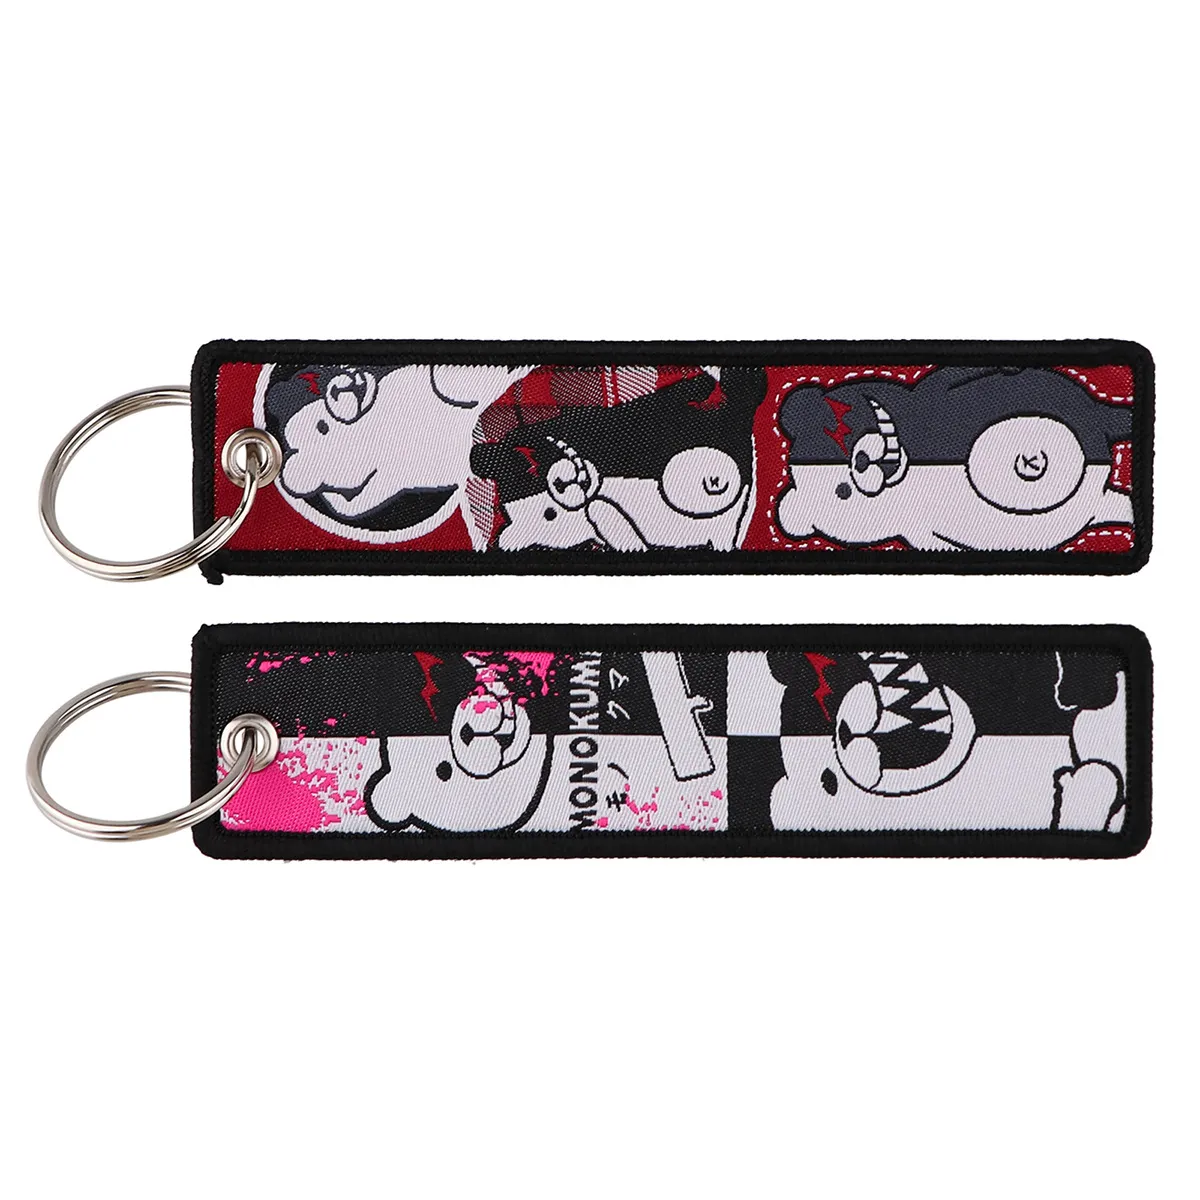 Keychains & Lanyards Various Types Of Cartoon Cool Key Tag Embroidery Fobs For Motorcycles Cars Bag Backpack Keychain Fashion Ring Gi Otmxx